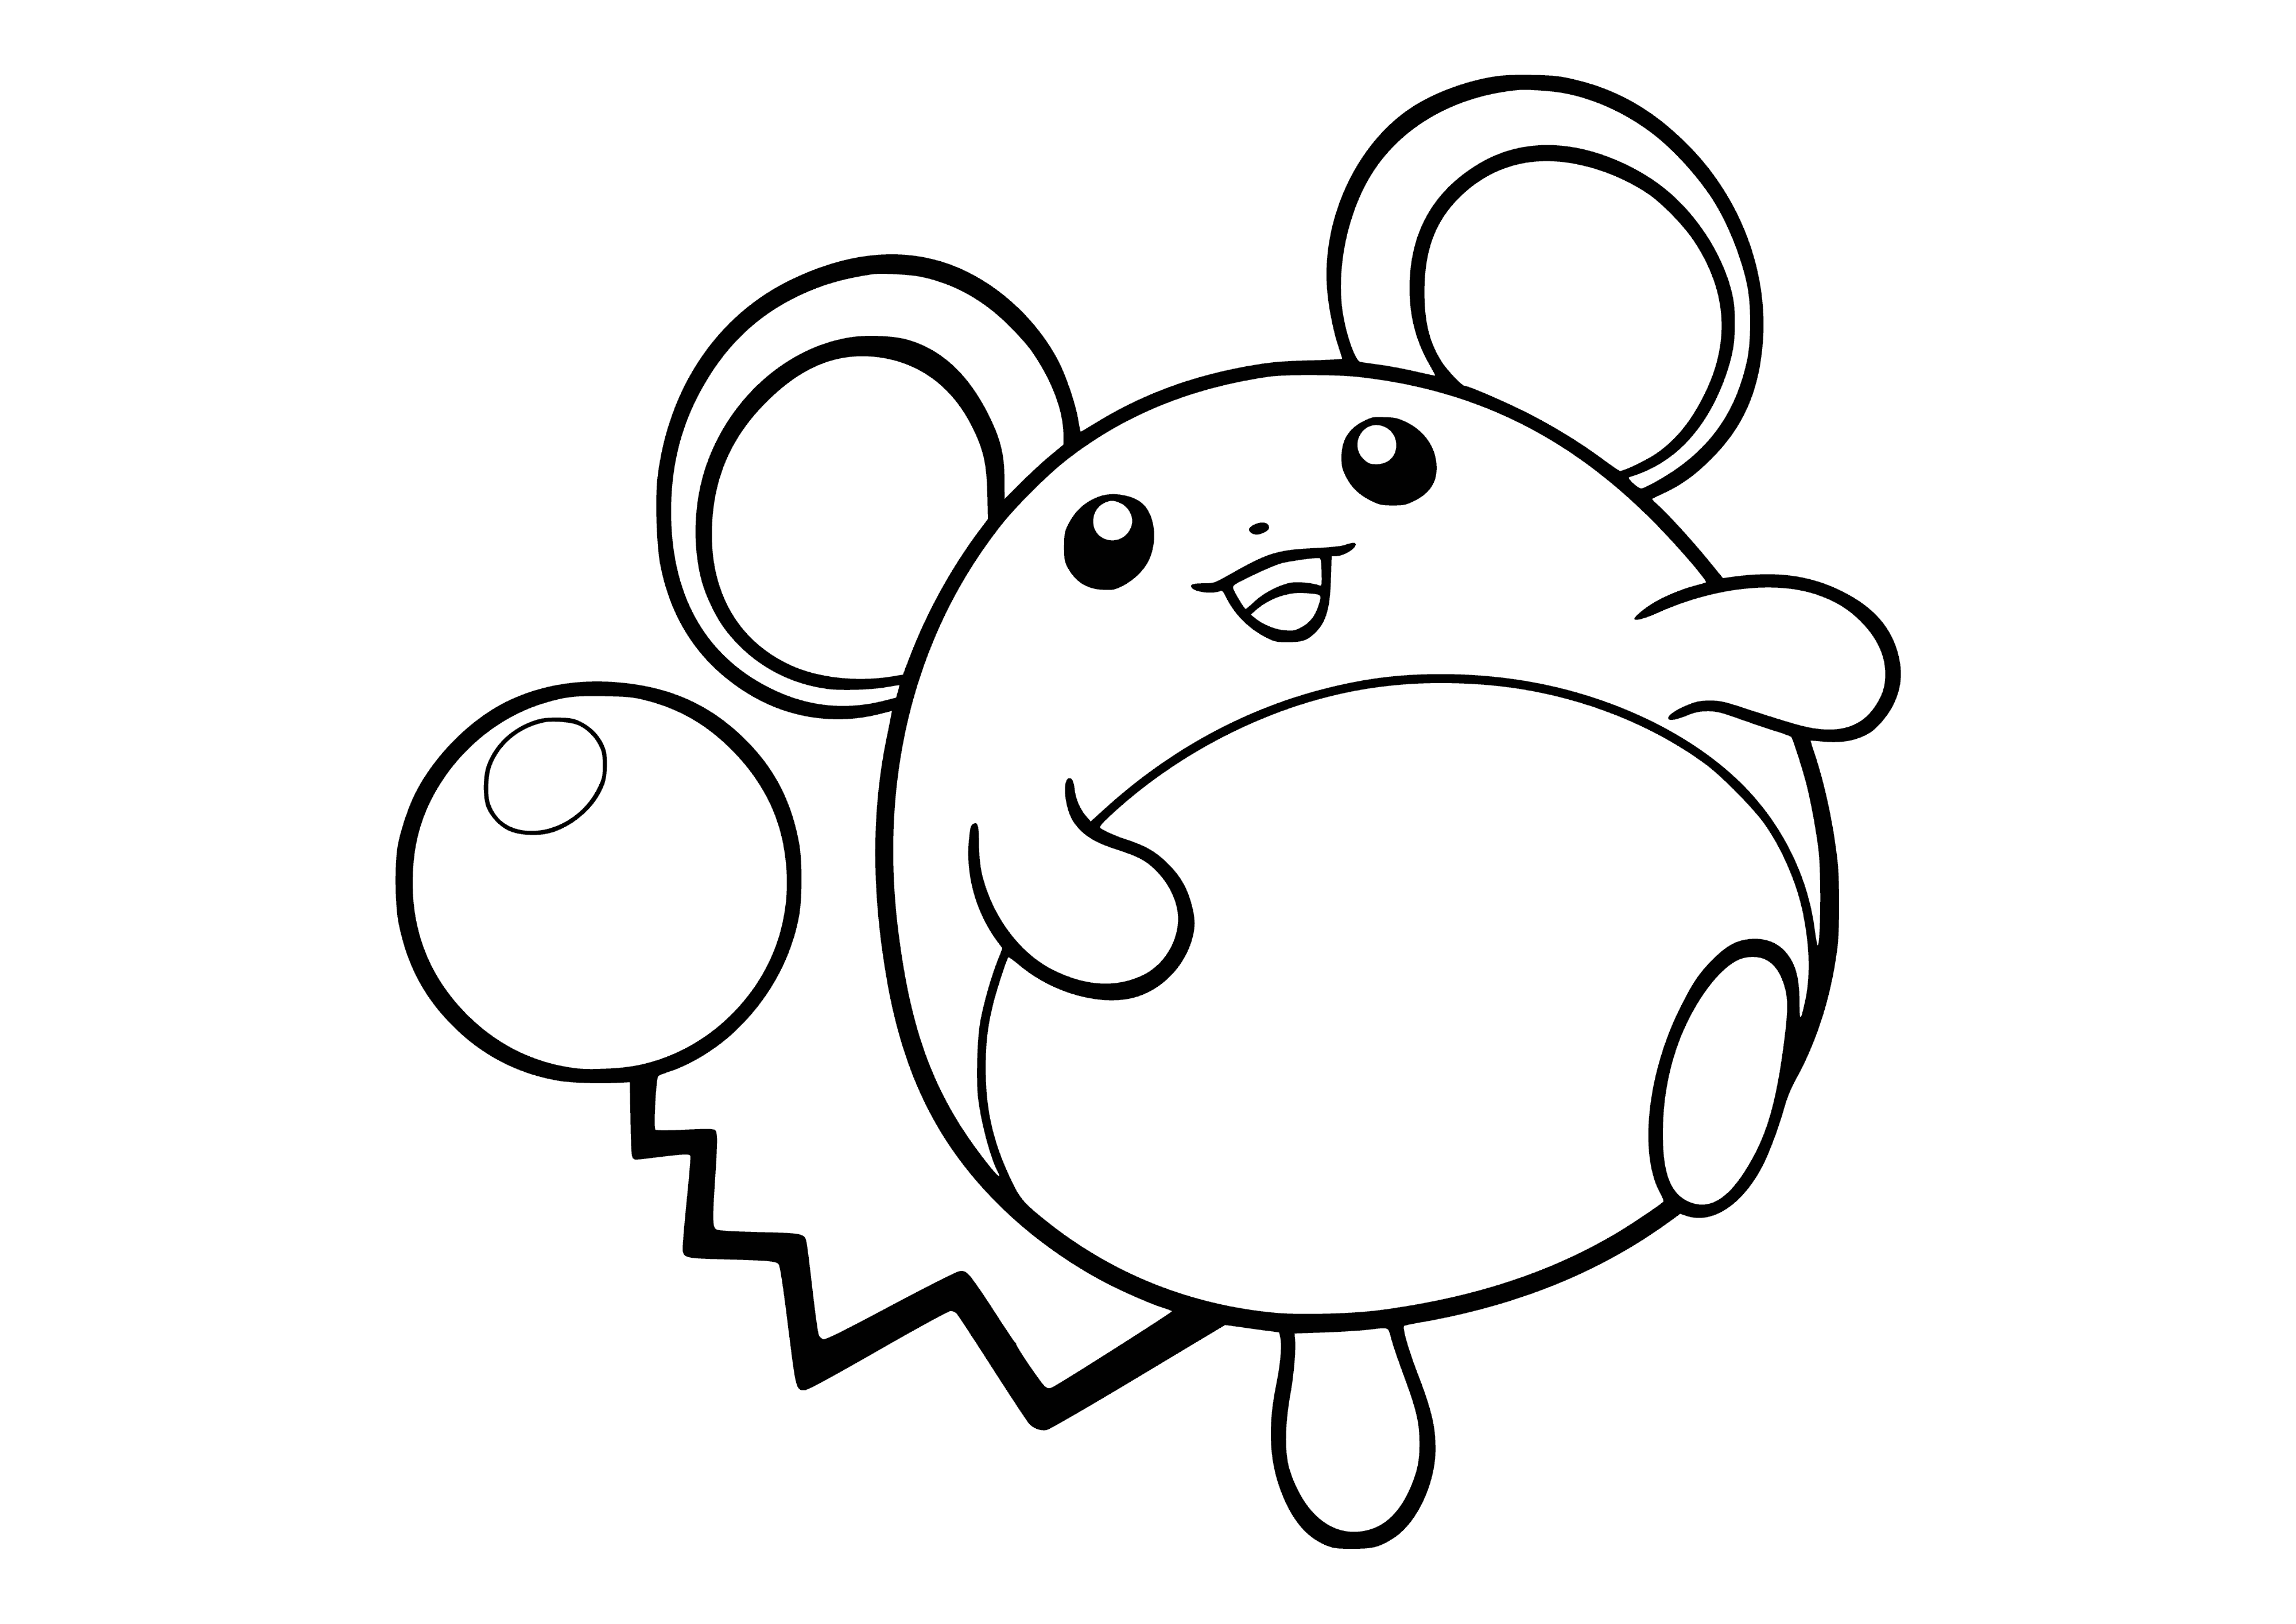 coloring page: Marill is a blue, furry water type Pokemon that evolves from Azurill. #Pokemon #Pokéman #coloringpage